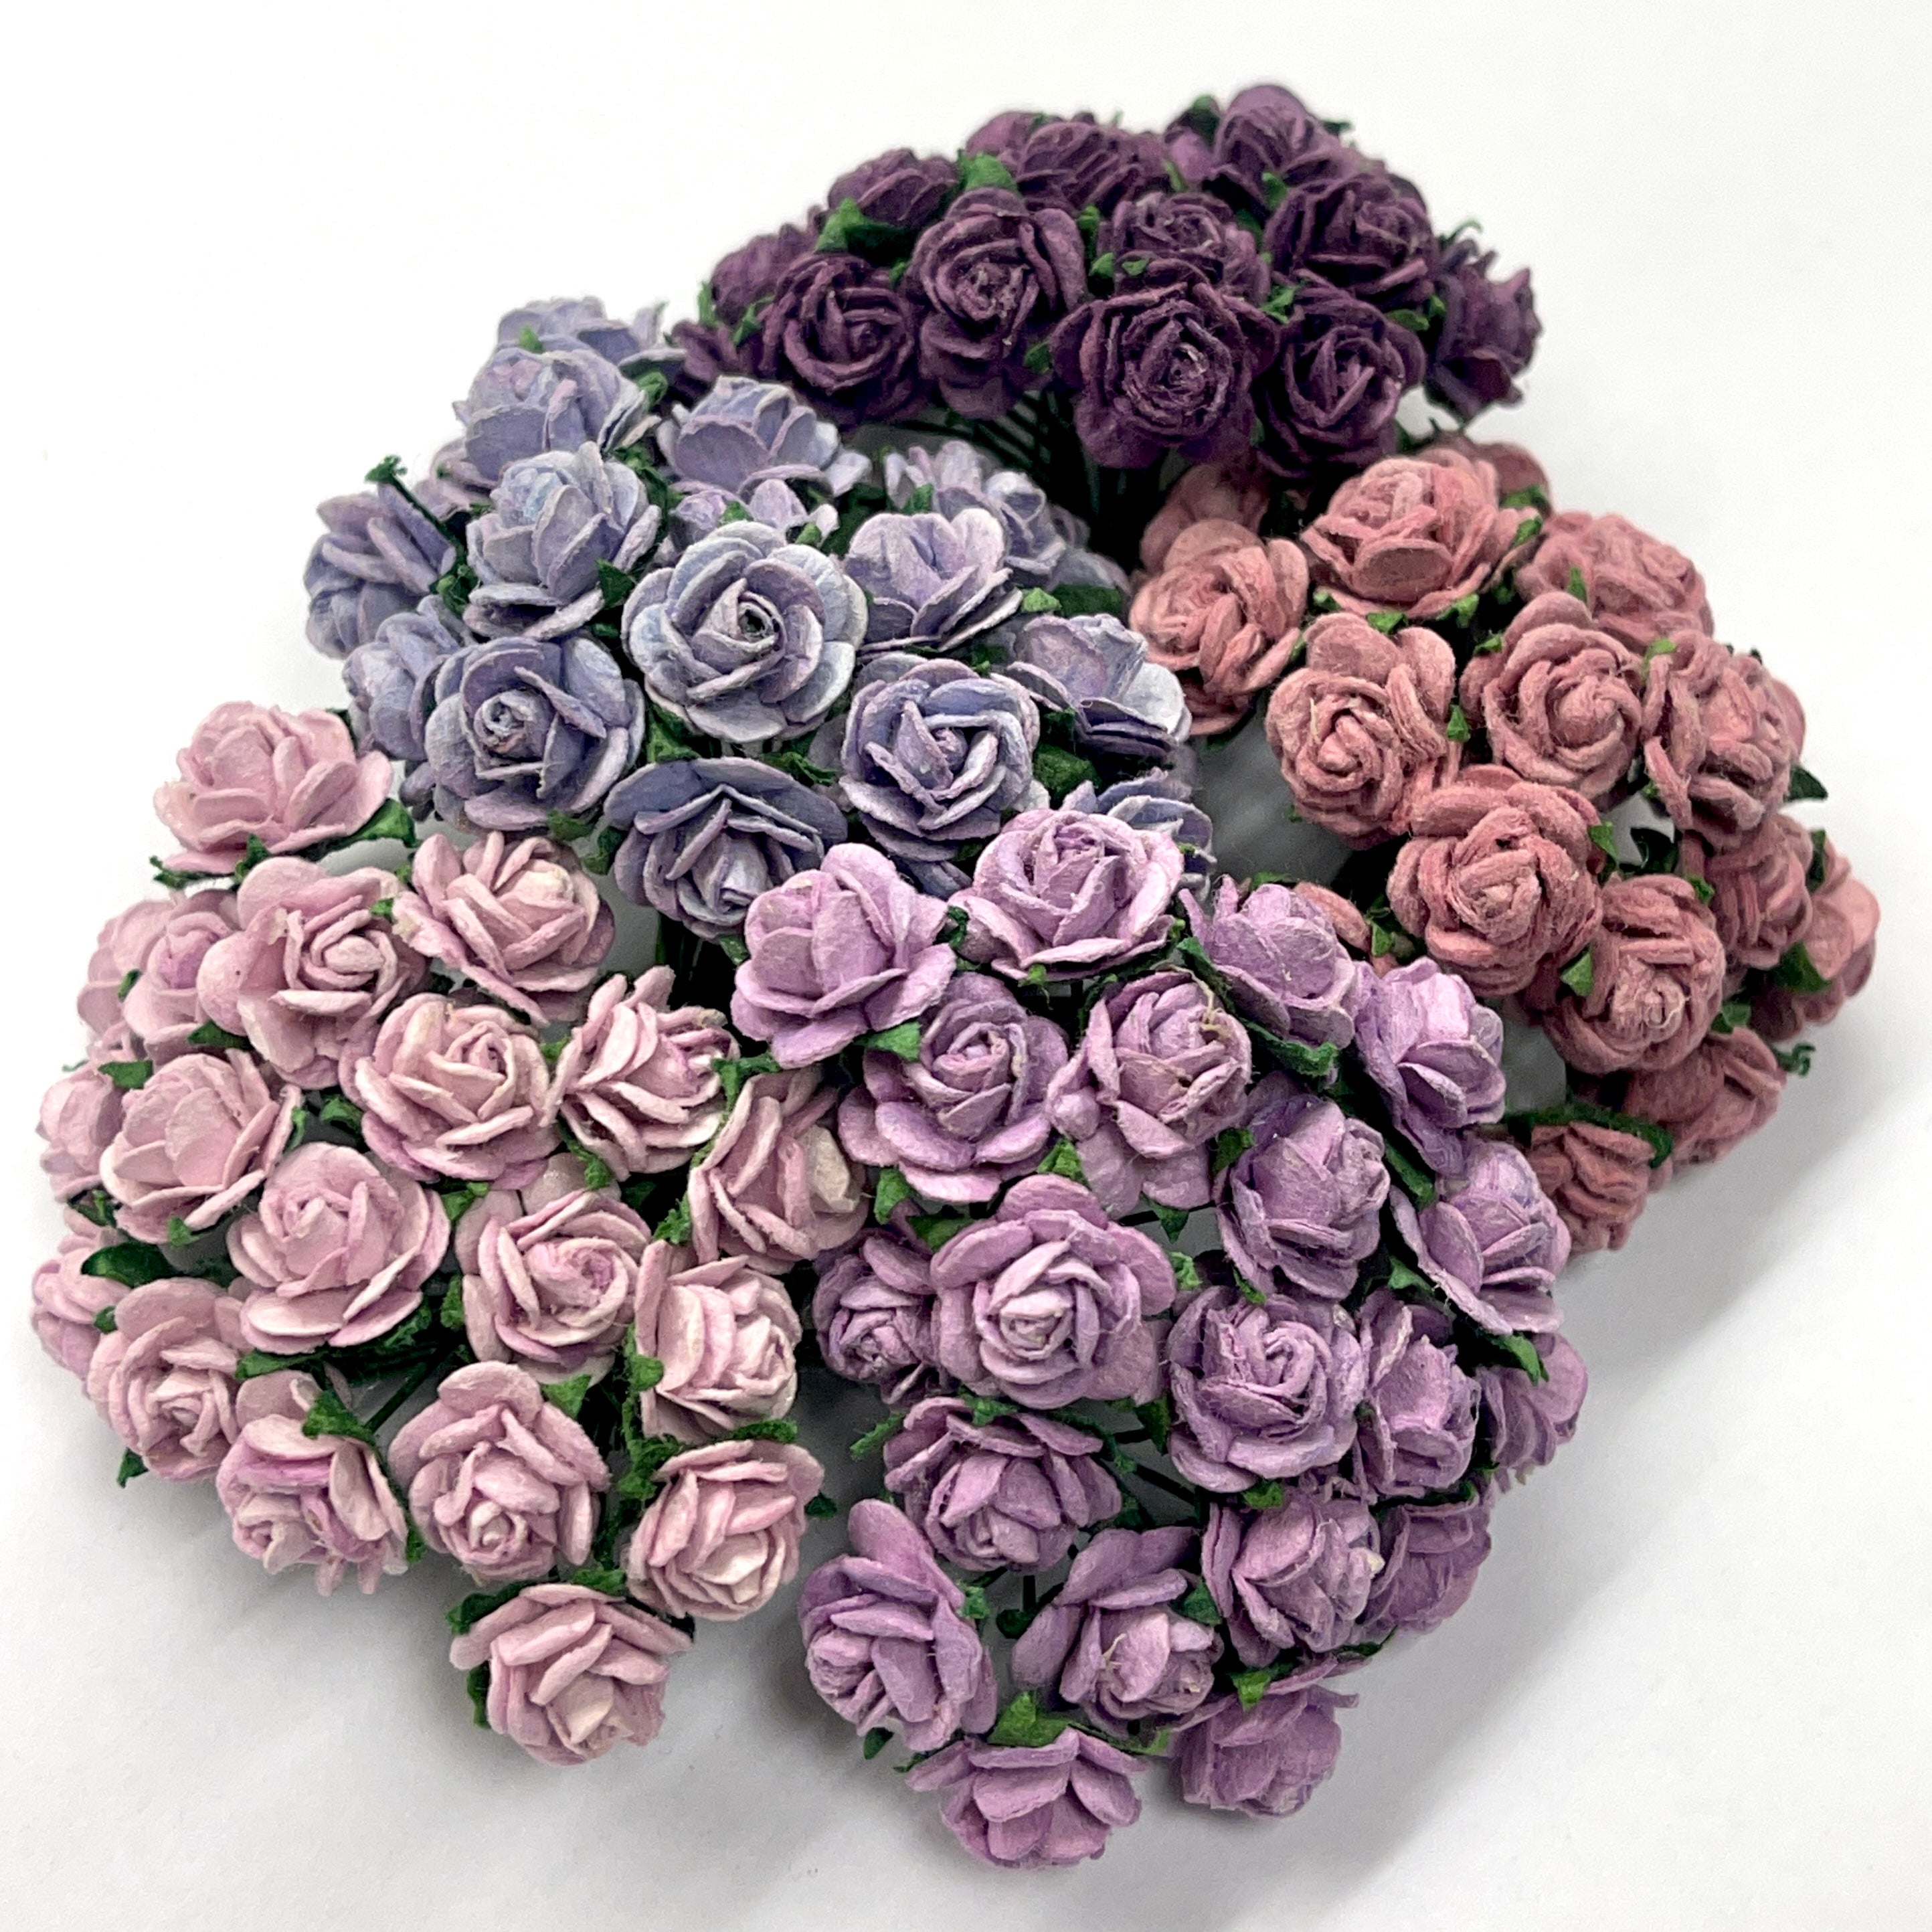 Wild Orchid - Roses 10mm - Mixed Purple & Lilac